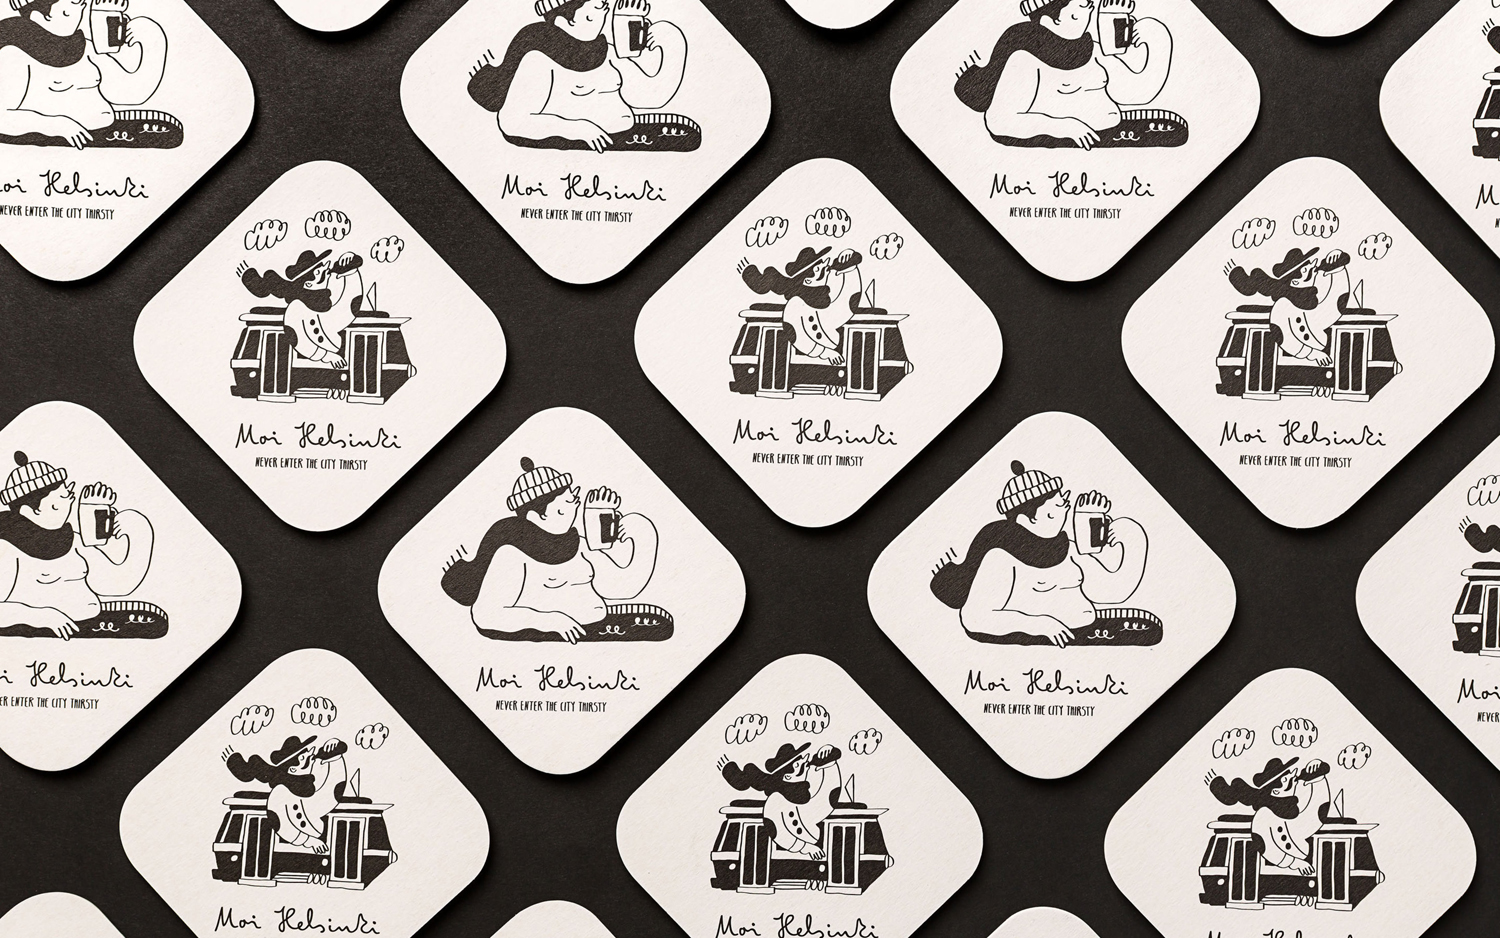 Brand identity and beer mats for Moi Helsinki by Bond, Finland